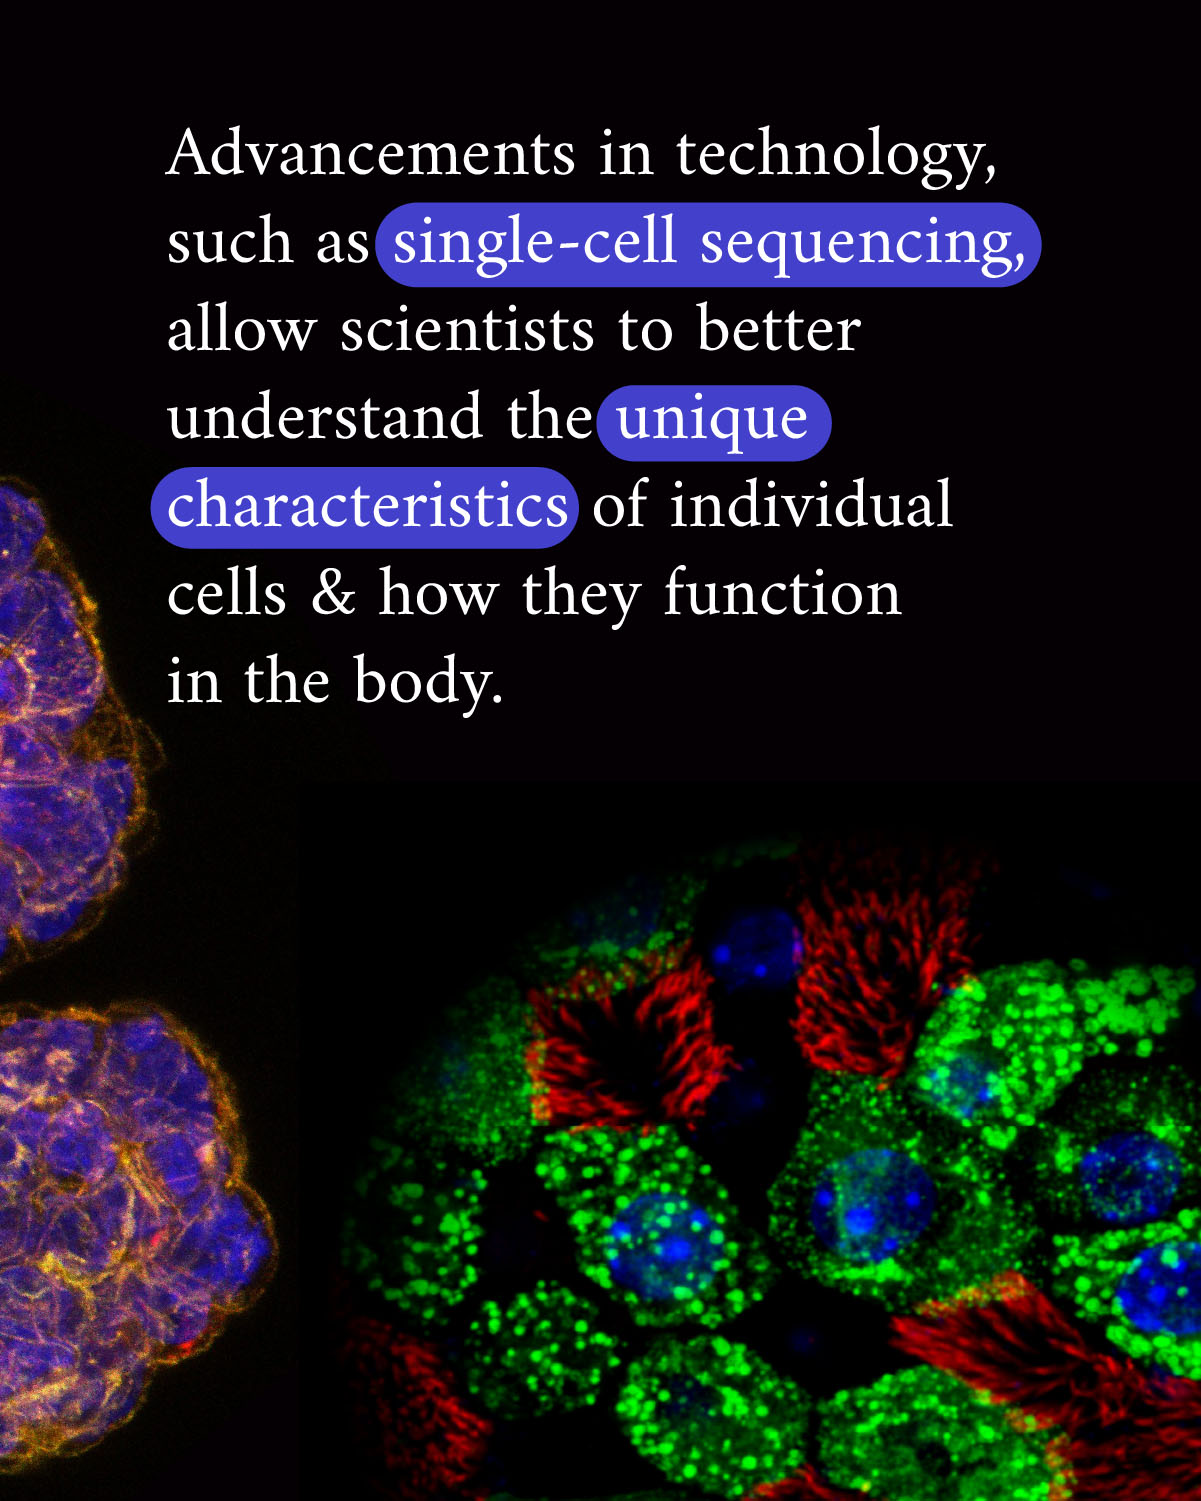 Infographic reads “Advancements in technology, such as single-cell sequencing, allow scientists to better understand the unique characteristics of individual cells & how they function in the body.” Magnified cell imagery accompanies the text in two sections, one section is in yellow, purple and pink colors, and the second section is in green, red and blue colors.